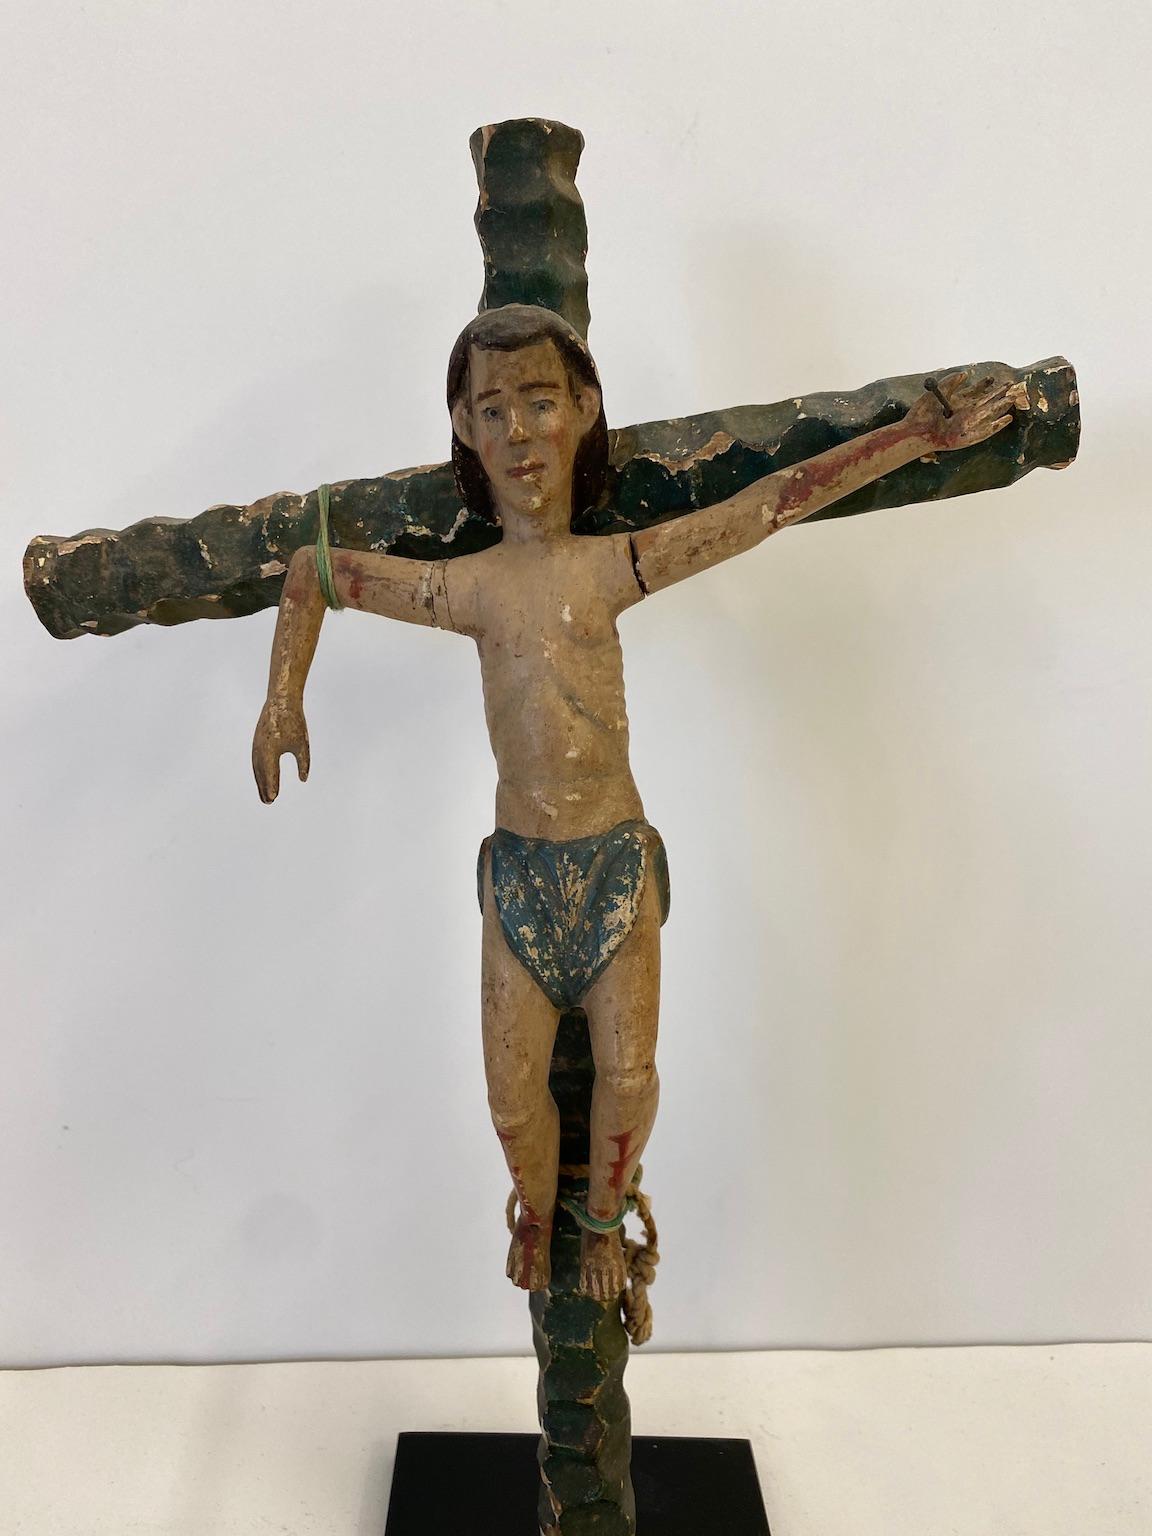 Two carved wooden figures on wooden crosses, from the Crucifixion of Christ story. They represent 